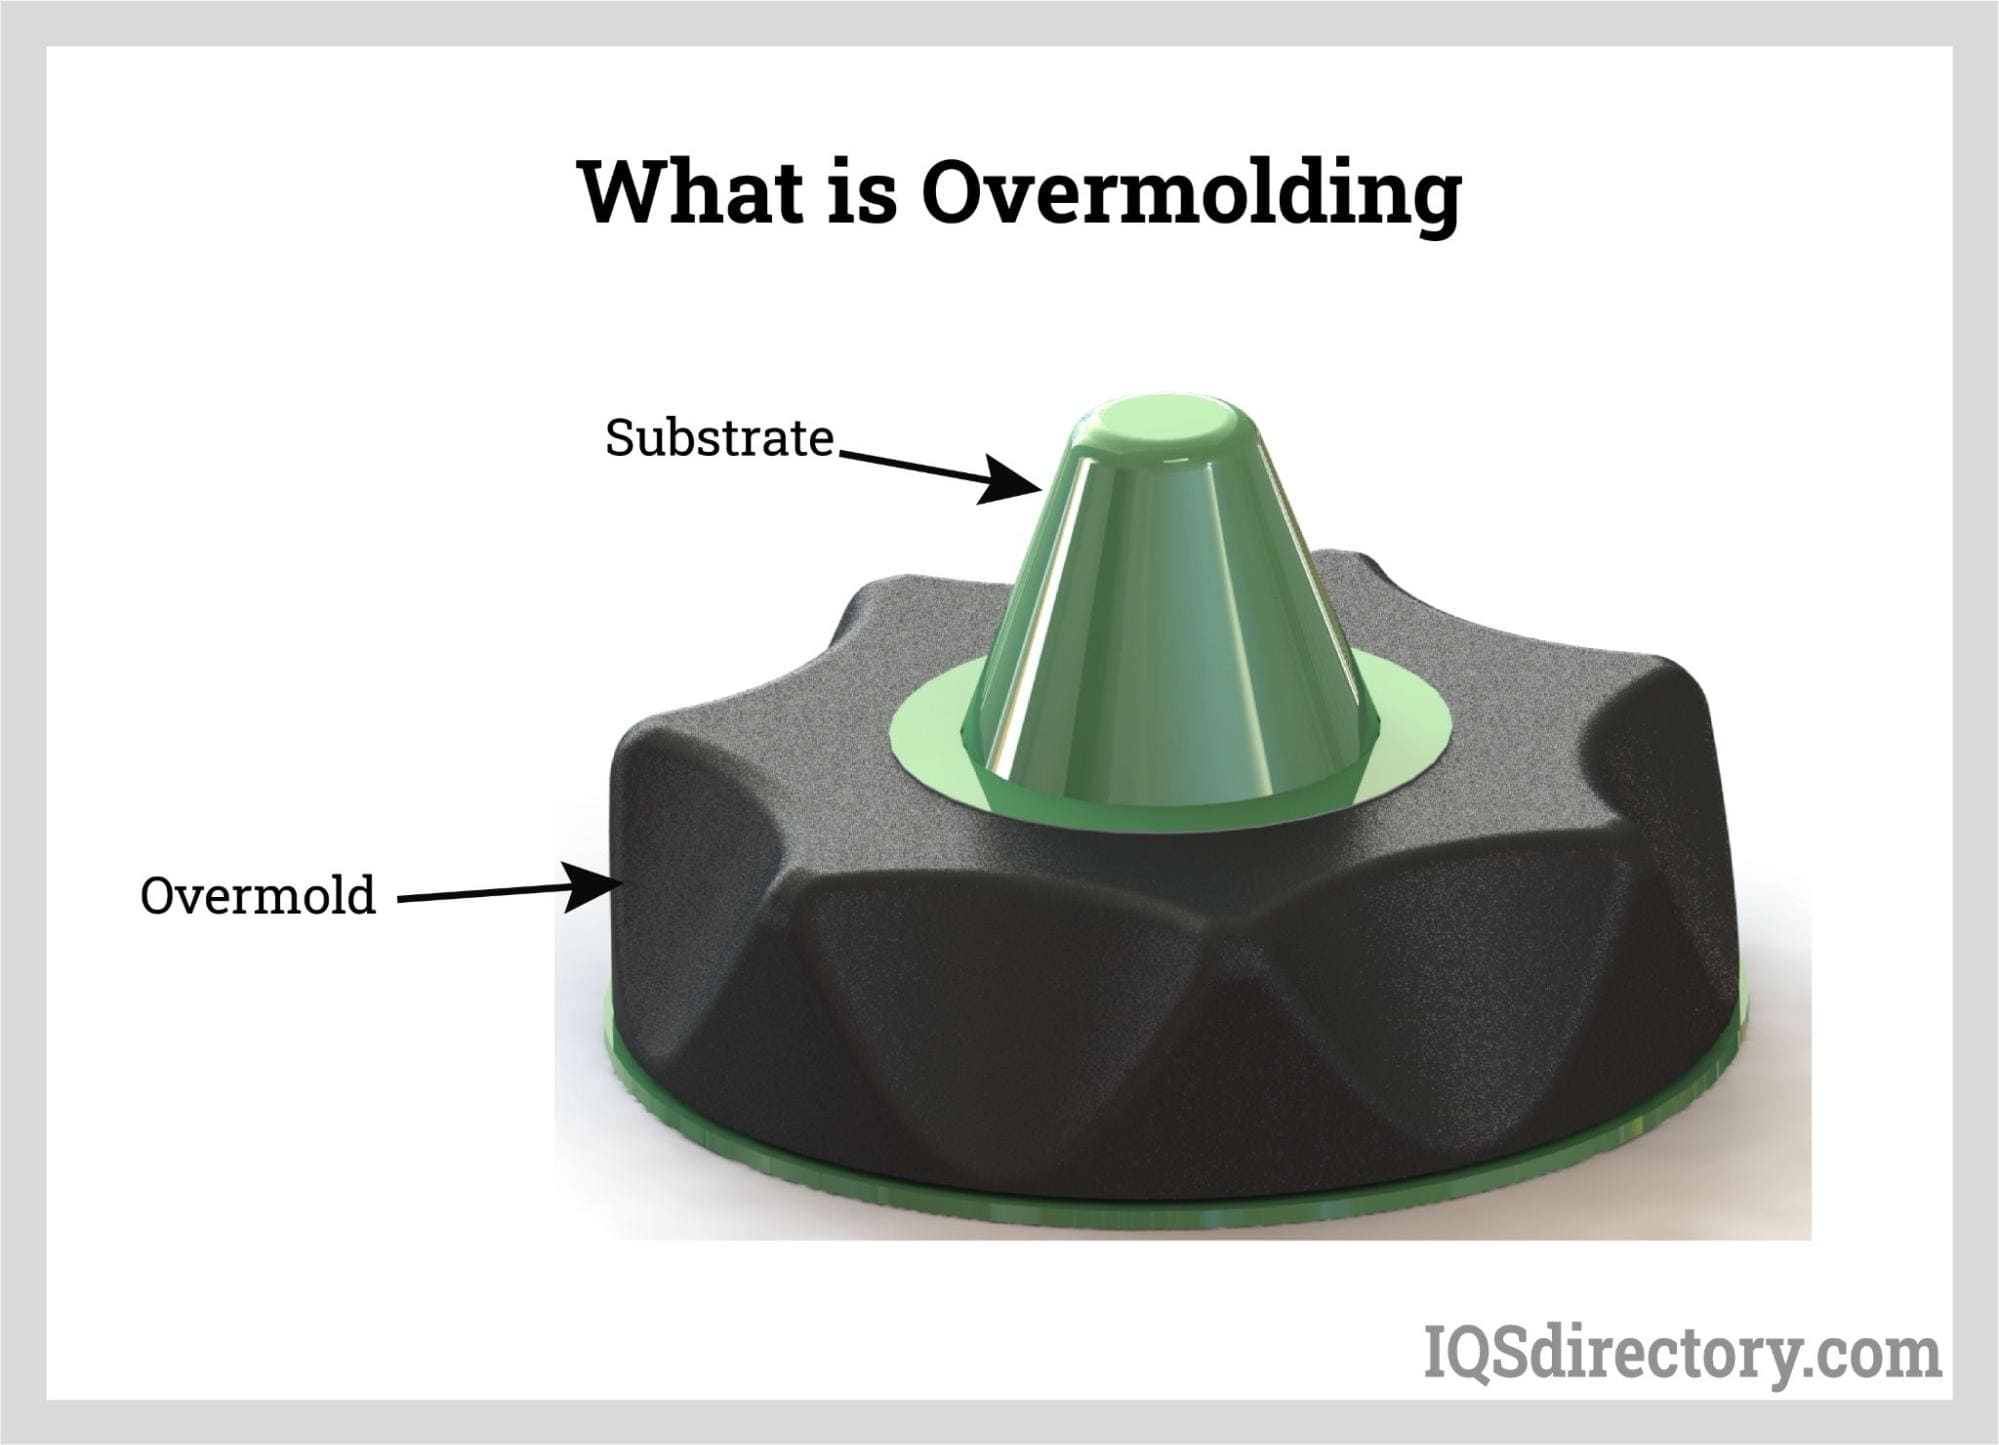 What is Overmolding